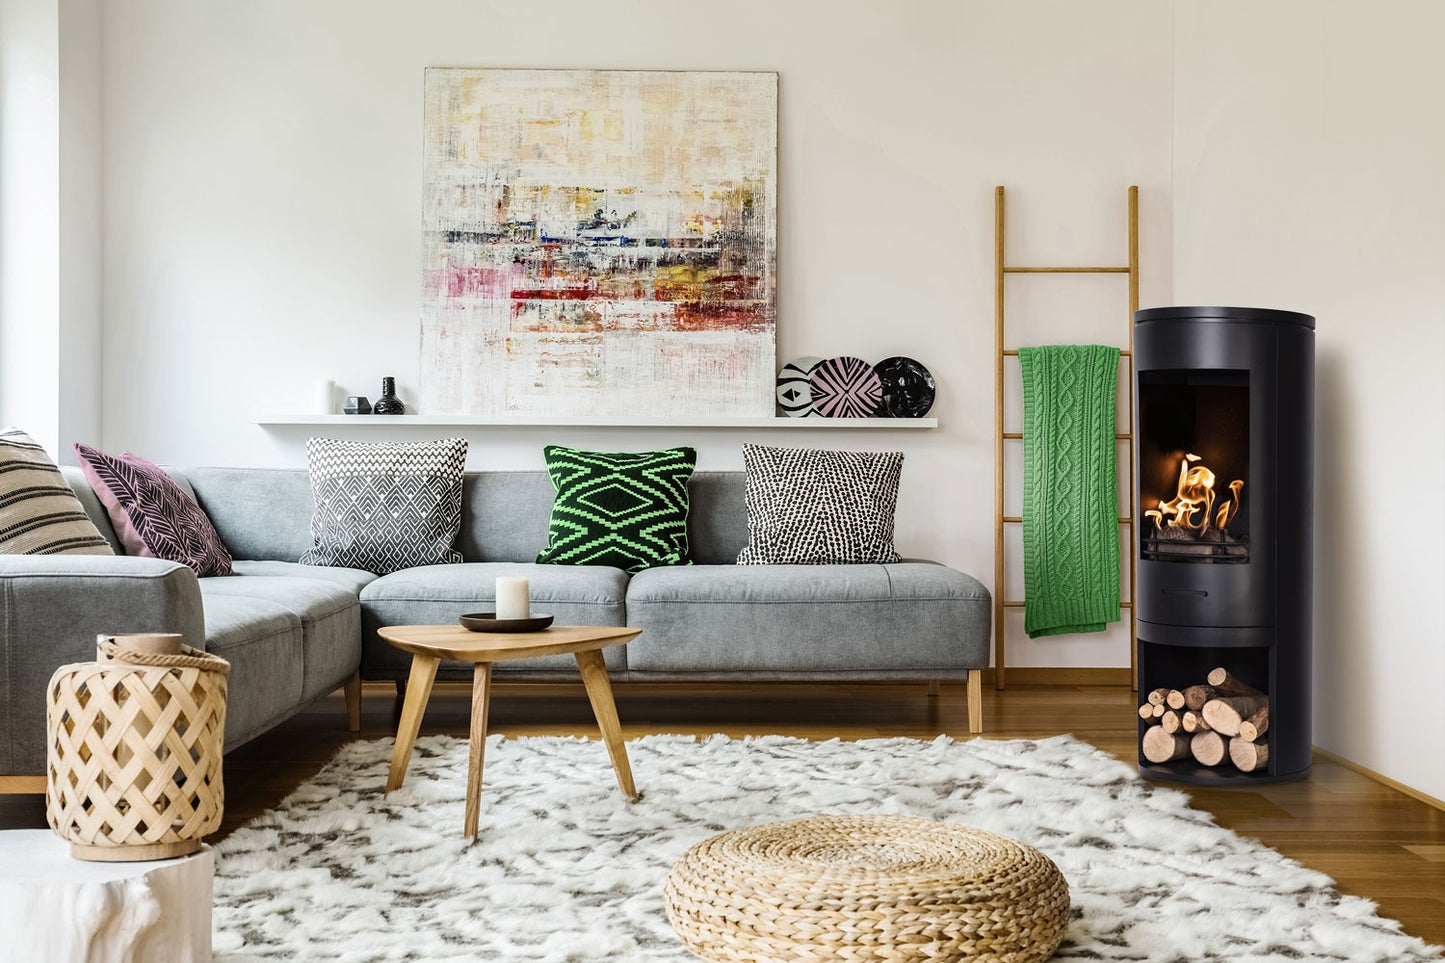 CYLINDER Black Modern XL Bioethanol Stove in contemporary living room